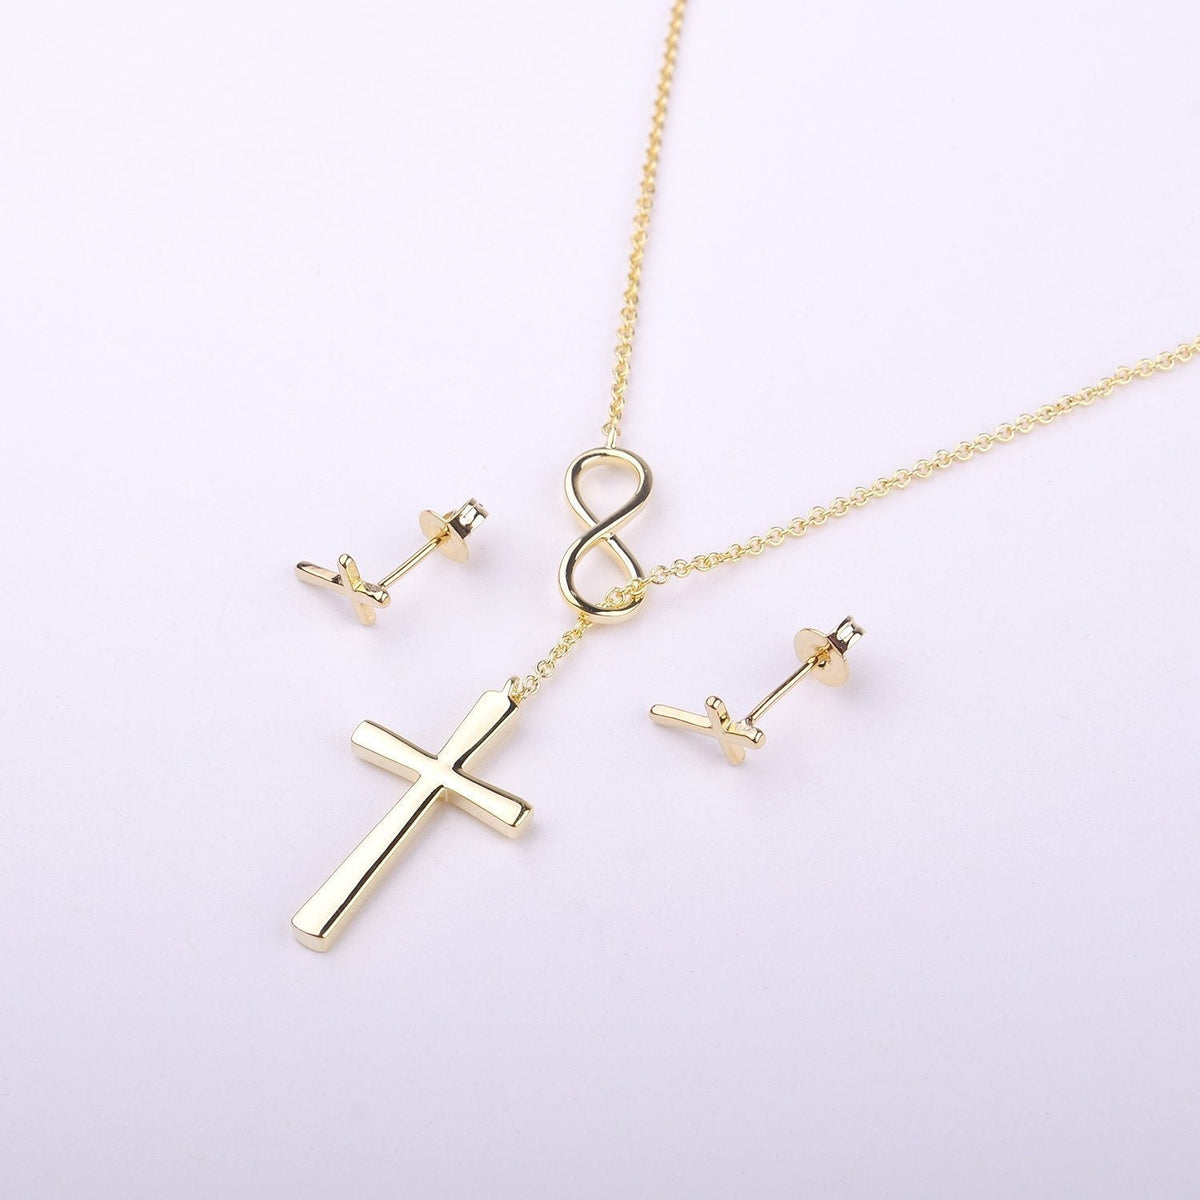 Confirmation Cross earring and Necklace Set Jewelry Set